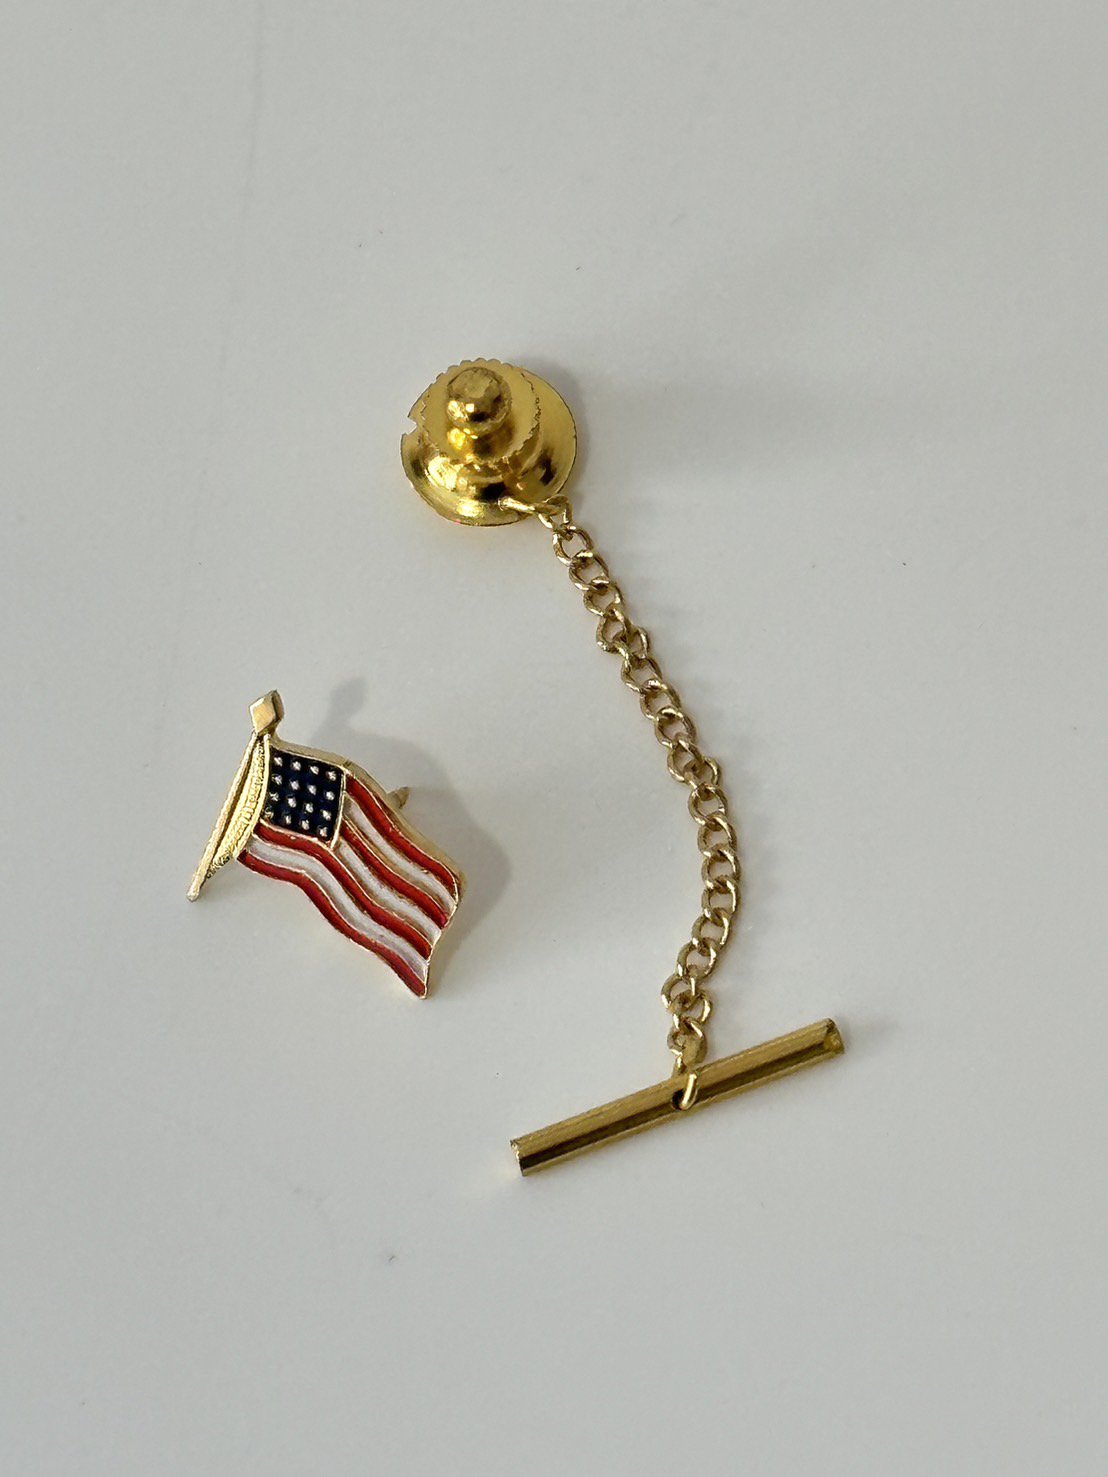 FINE AND Dandy<br />LAPEL PIN (AMERICAN FLAG) / GODO<img class='new_mark_img2' src='https://img.shop-pro.jp/img/new/icons47.gif' style='border:none;display:inline;margin:0px;padding:0px;width:auto;' />